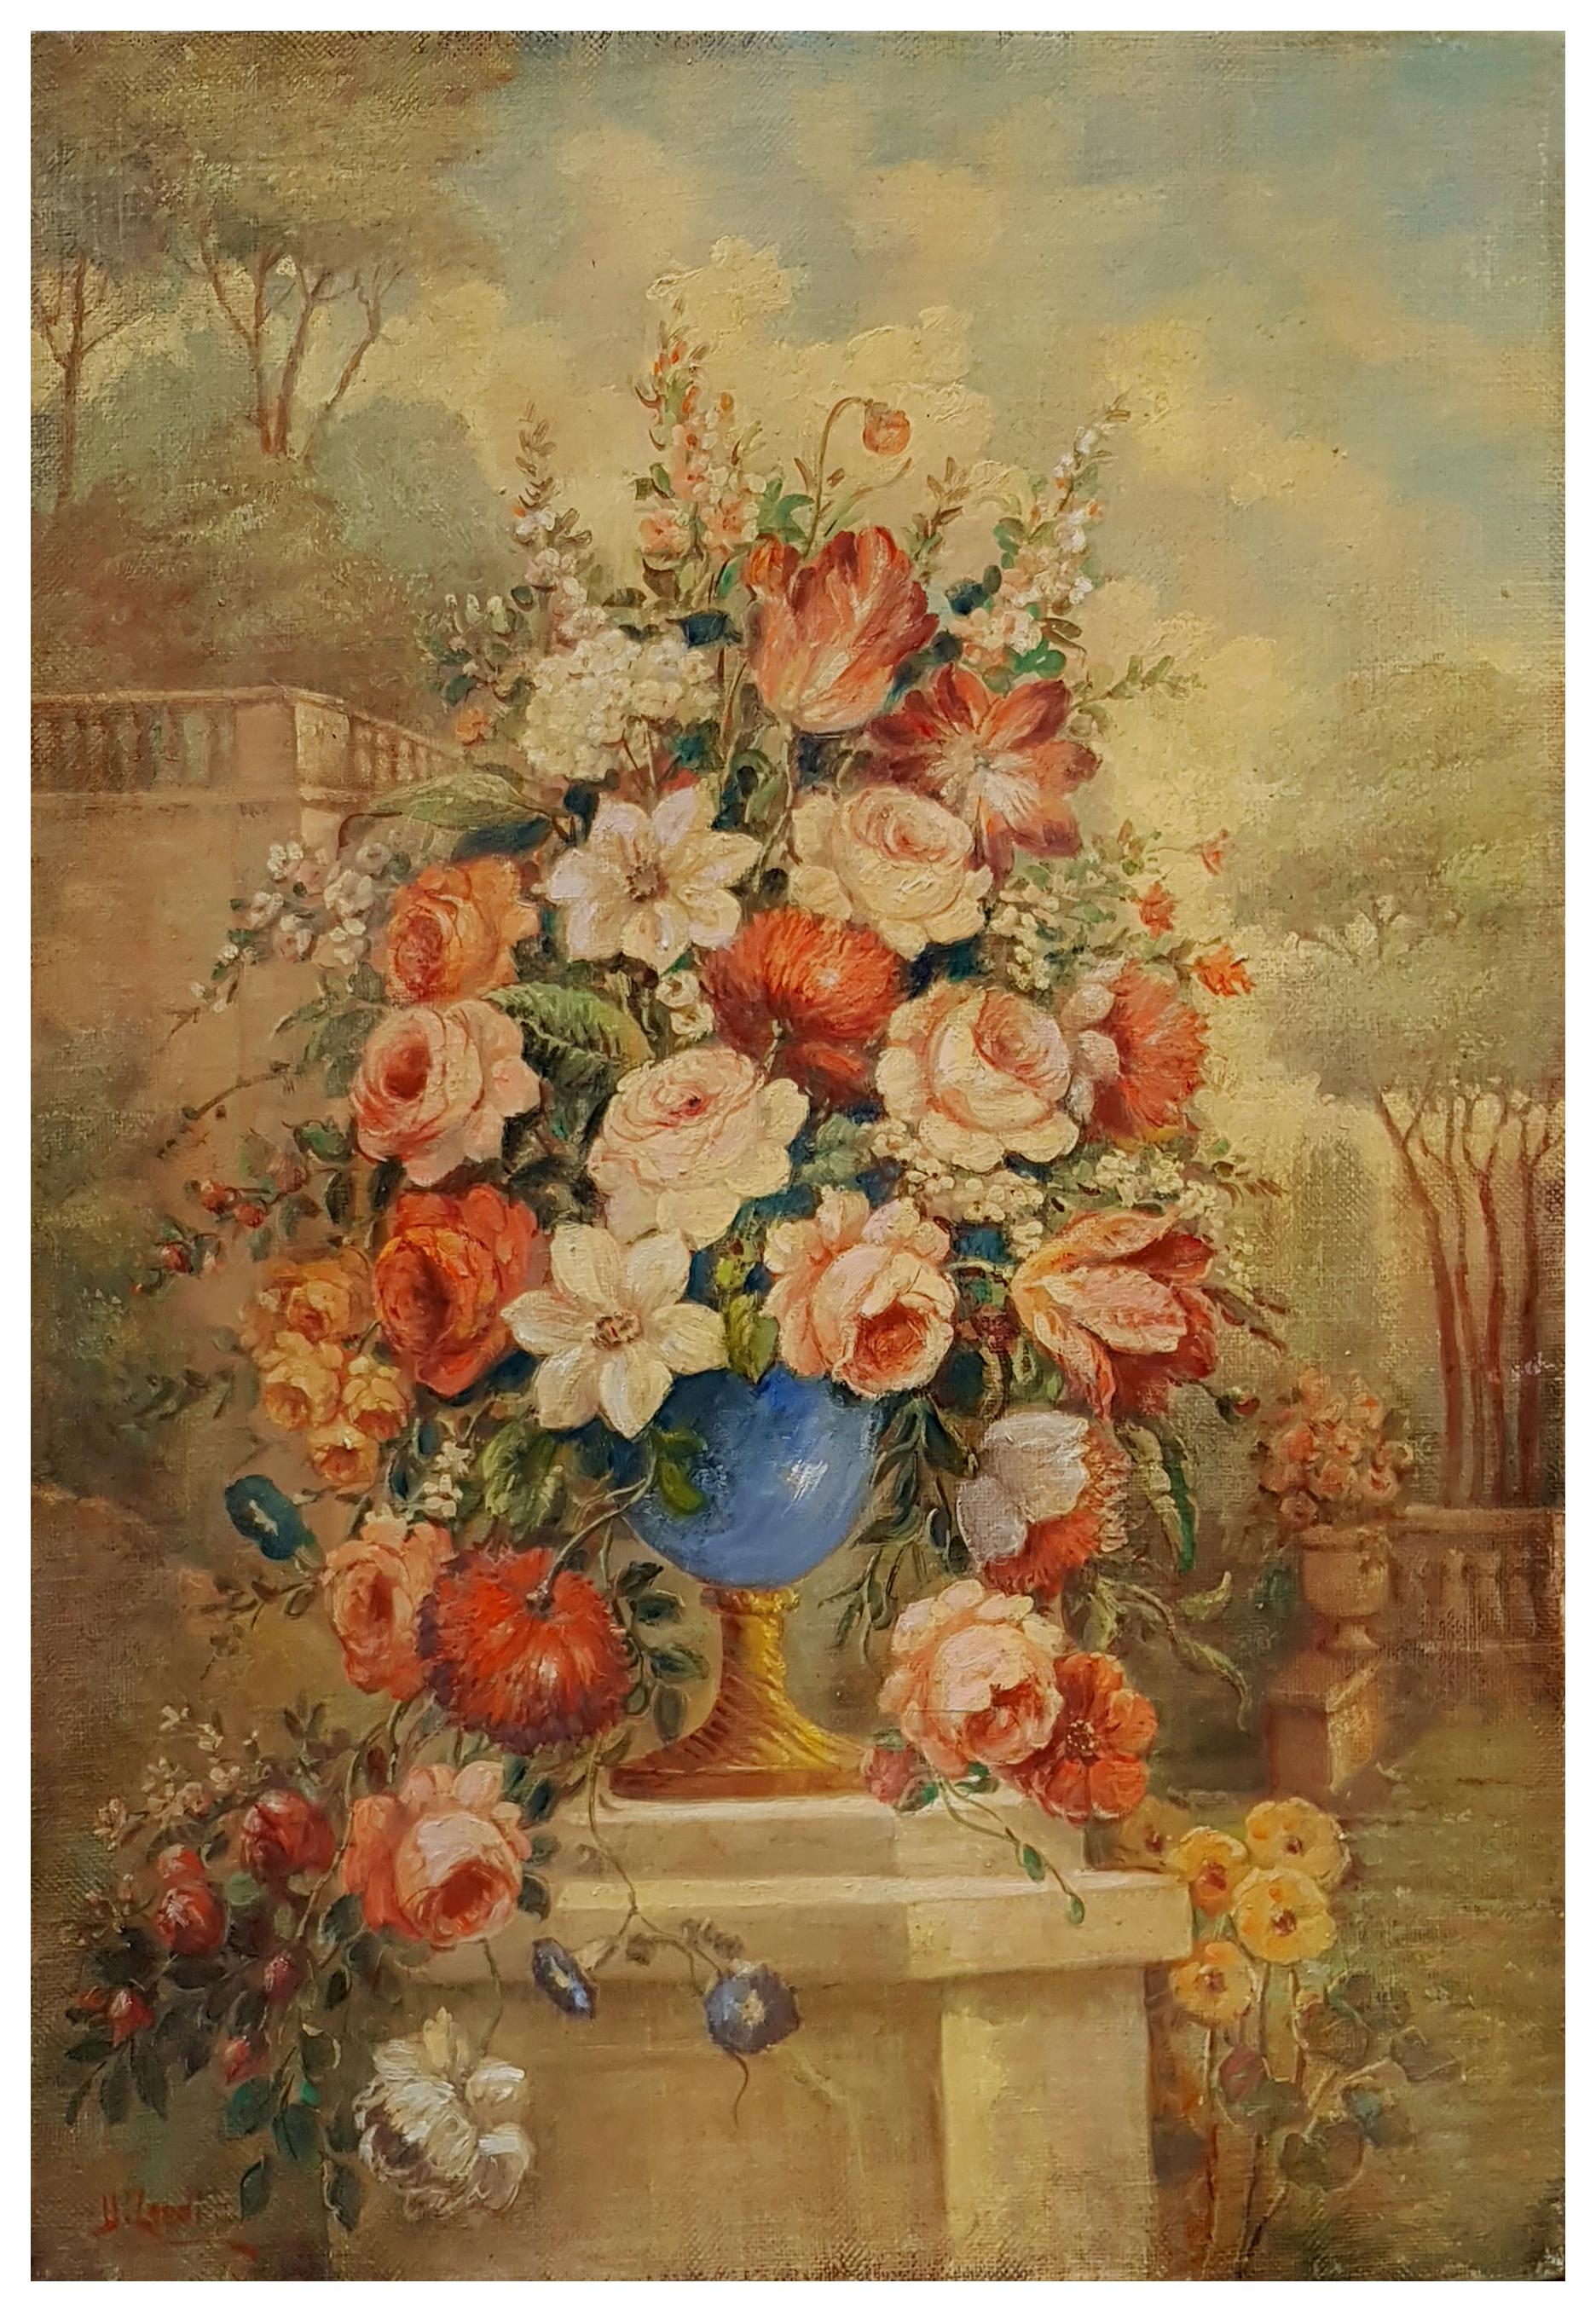 Flowers -Vittorio Landi Italia 2012 - Oil on canvas cm. 88 x 62.
 .
The painting recalls in the pictorial ways and in the choice of the subject the works of the Neapolitan painter Gasparo Lopez dei Fiori, He distinguished himself for his